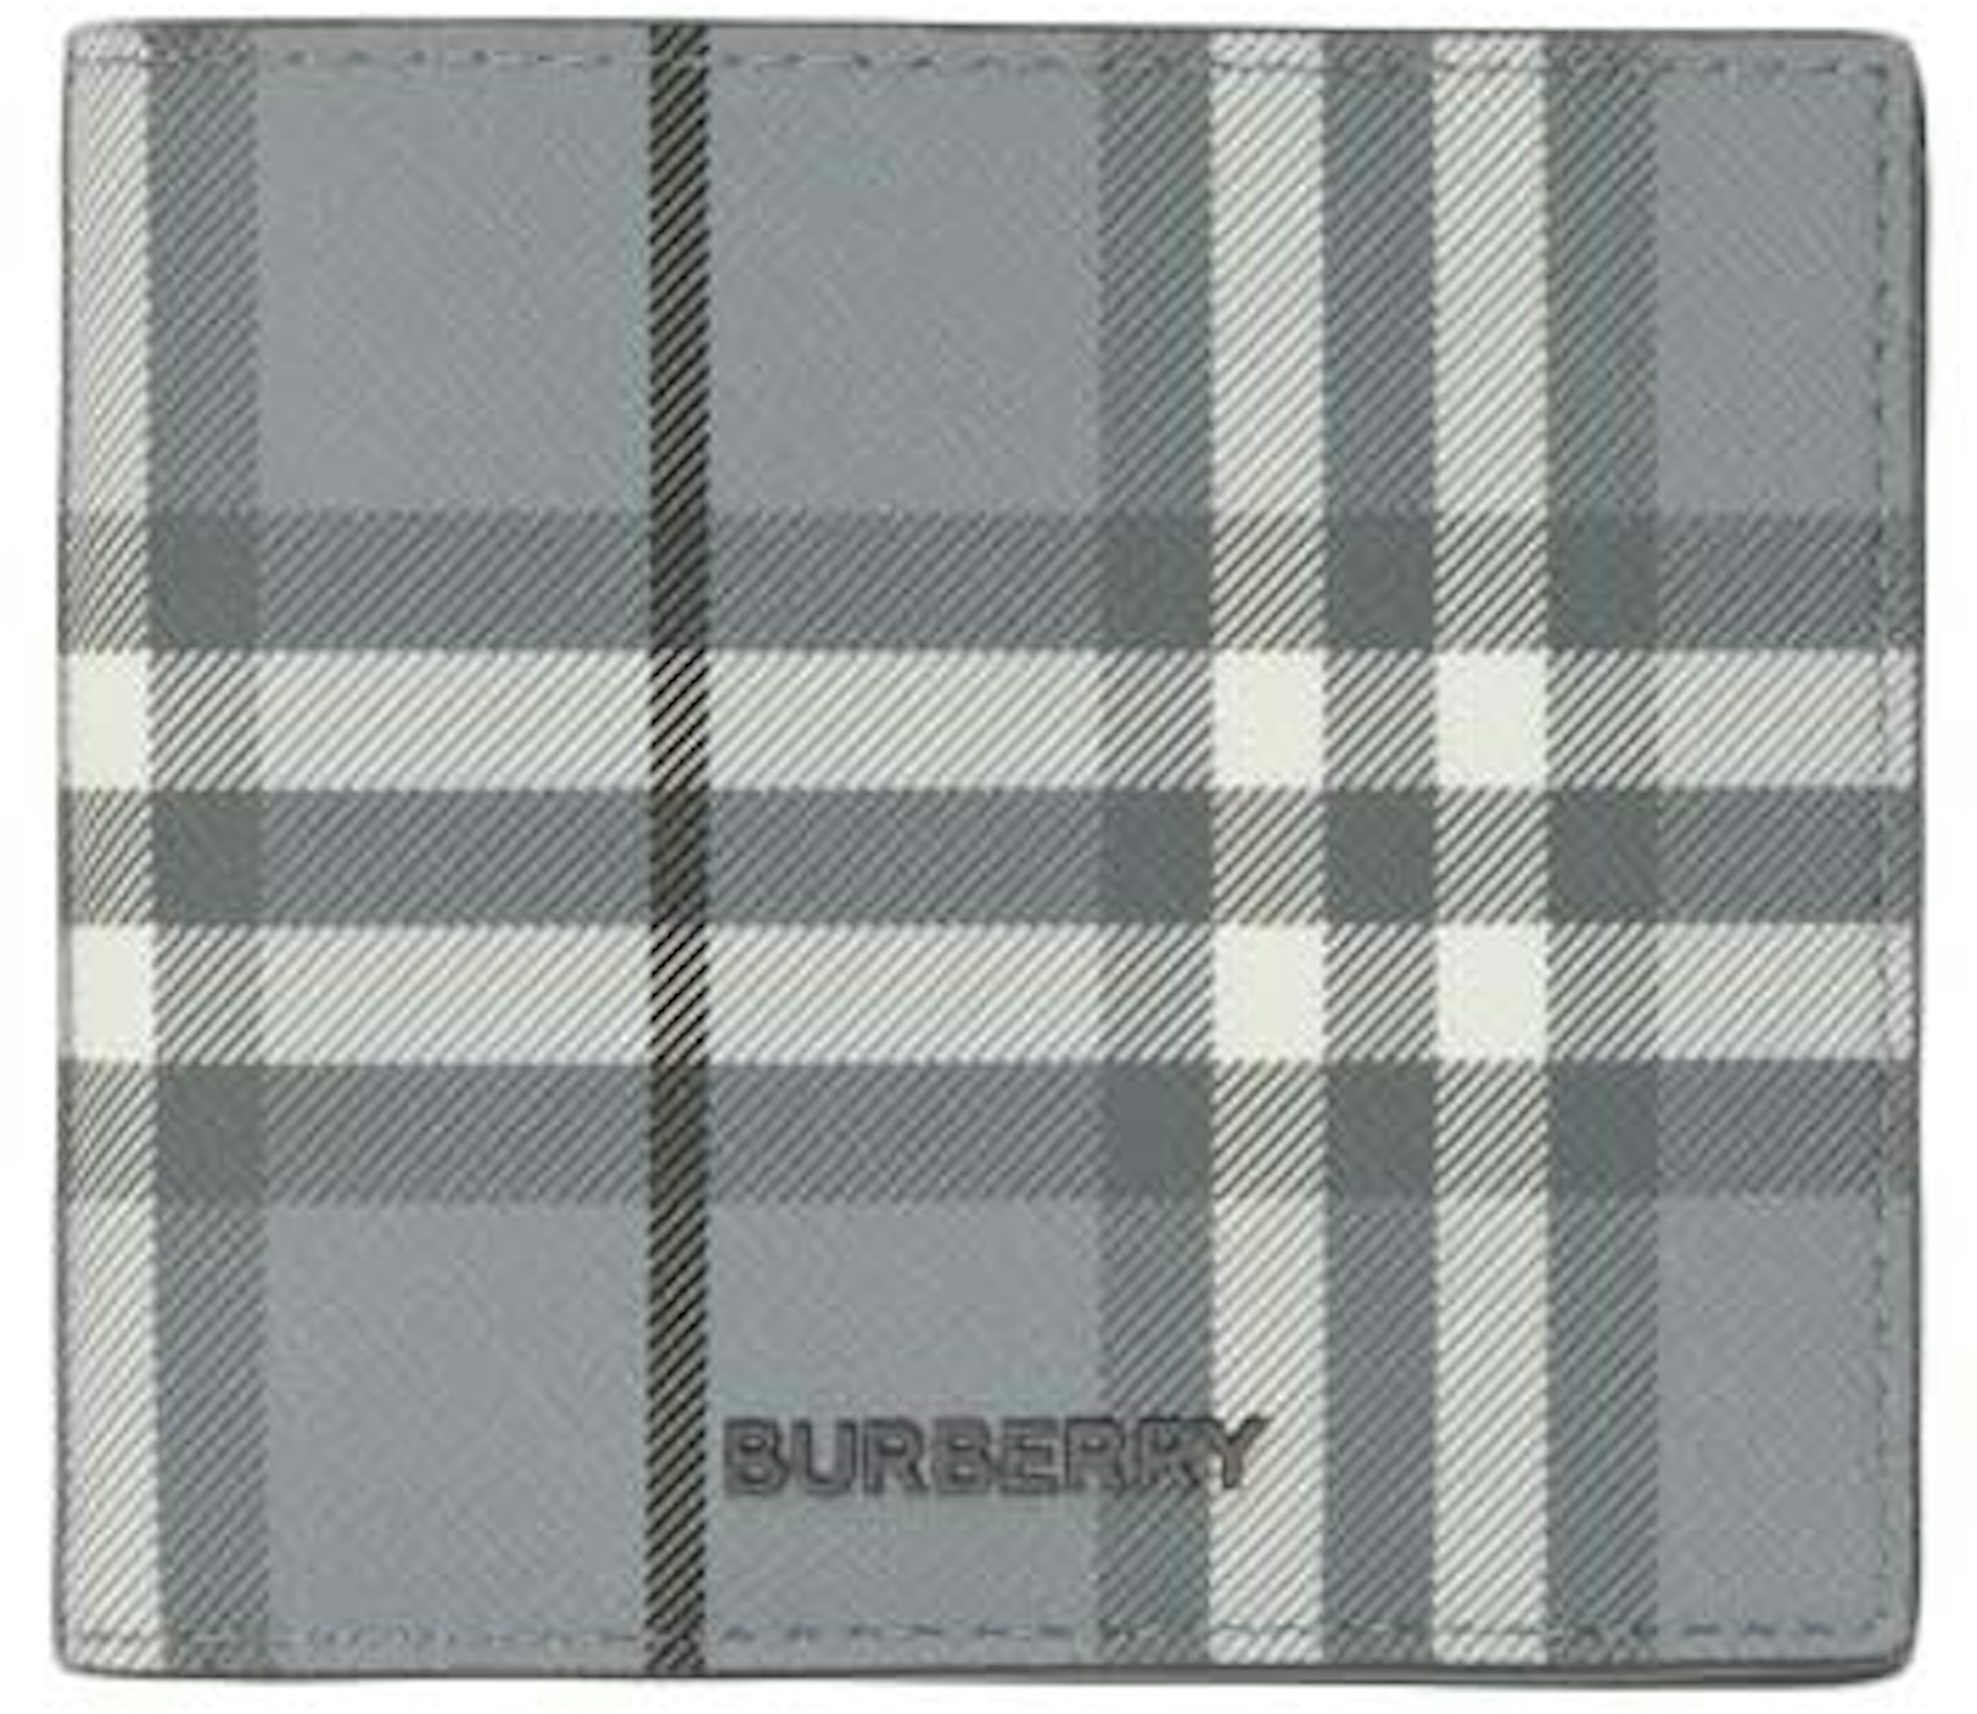 AUTHENTIC Burberry Vintage Check Bifold Coin Wallet BRAND NEW